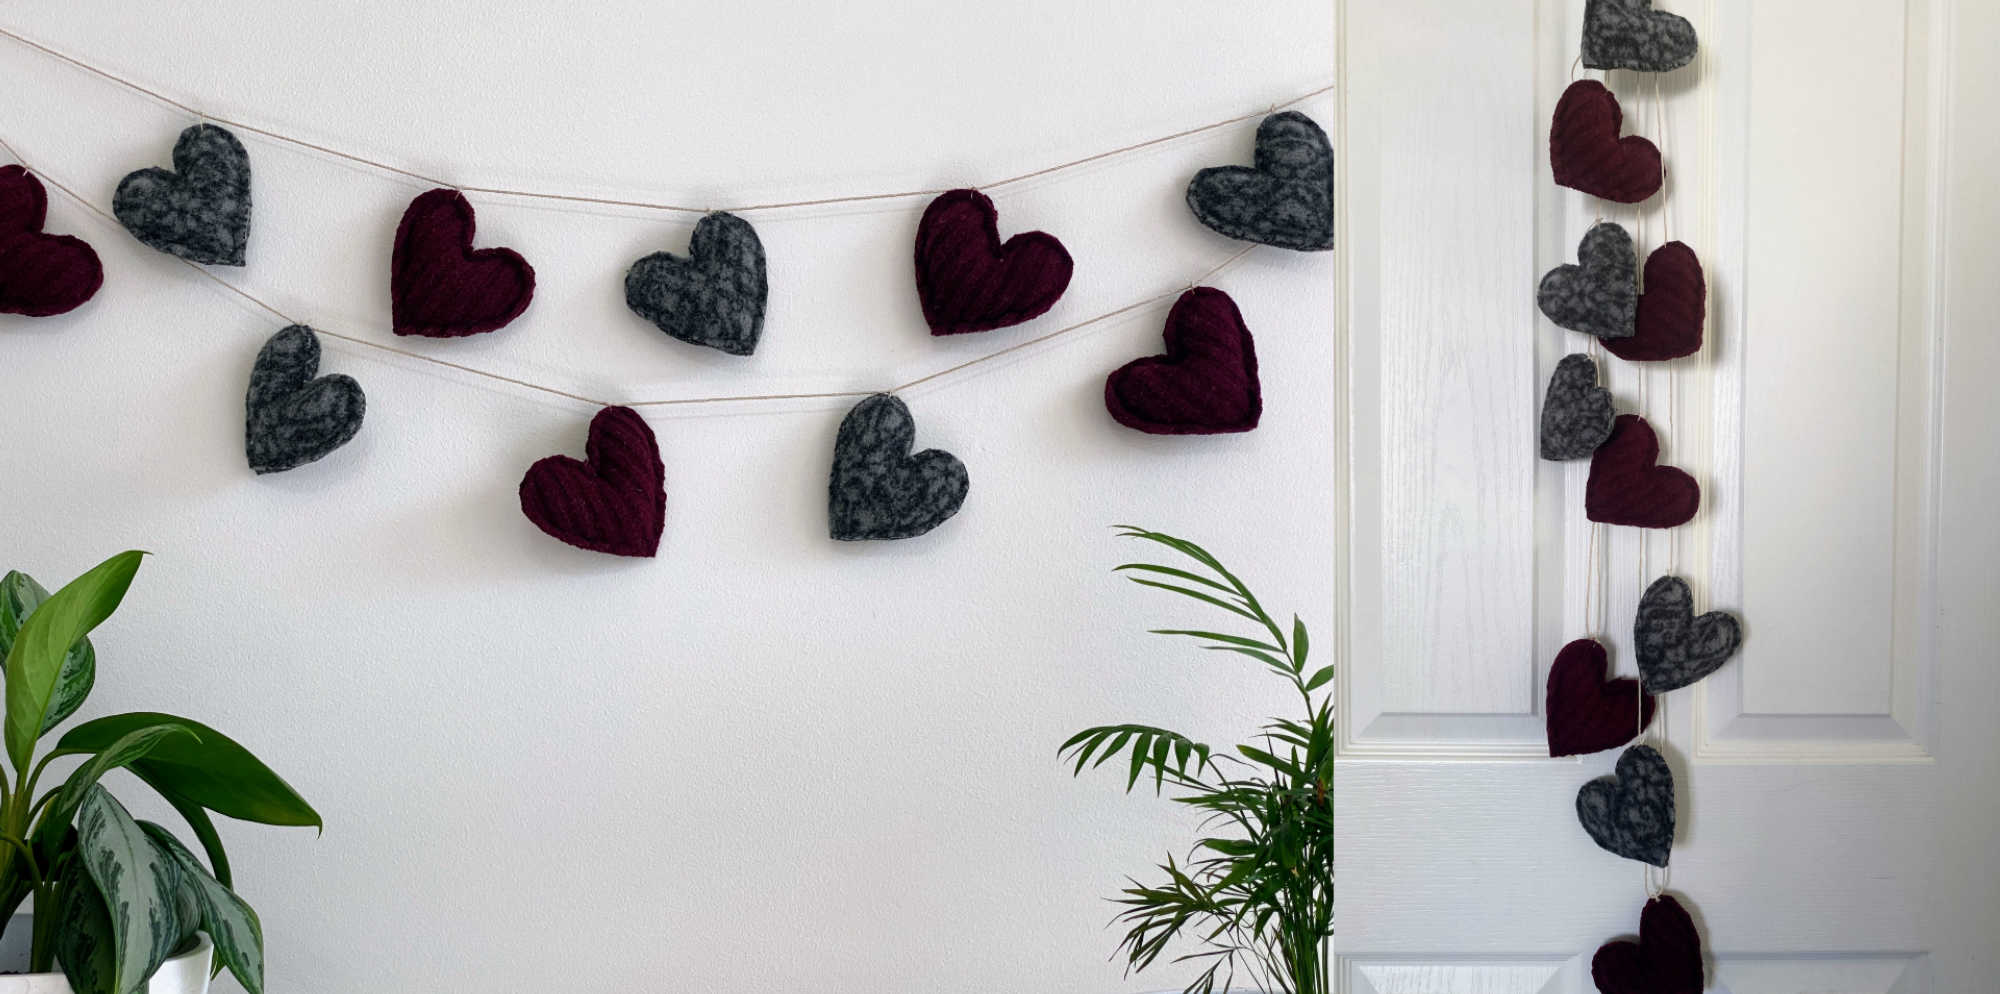 The completed felted heart garland. On the left, it is displayed on a wall. On the right, it is displayed hung on a door.